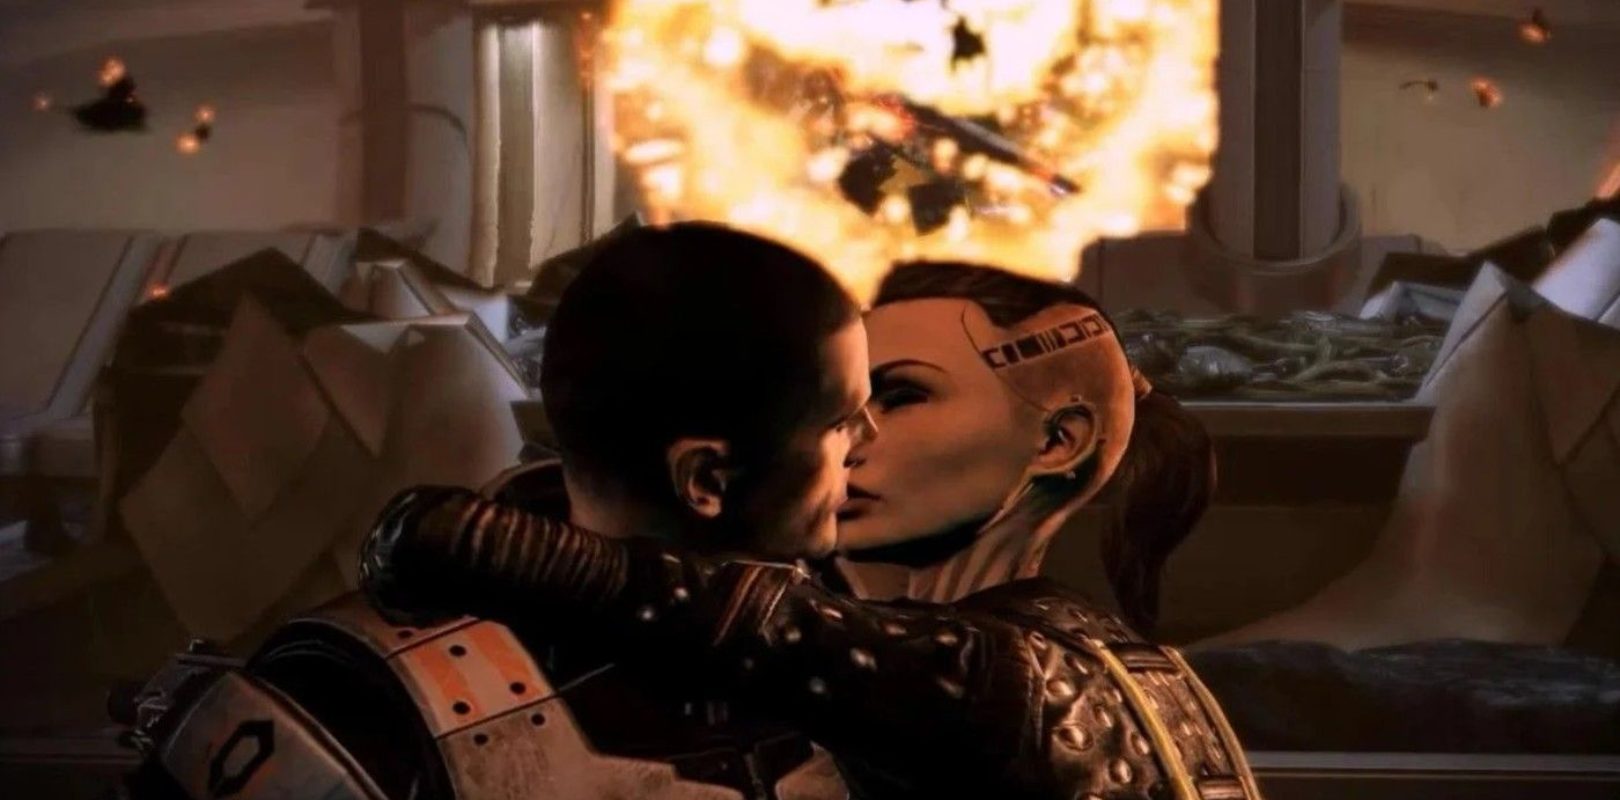 Mass Effect Jack Romance Guide How To Romance PrimeWikis picture